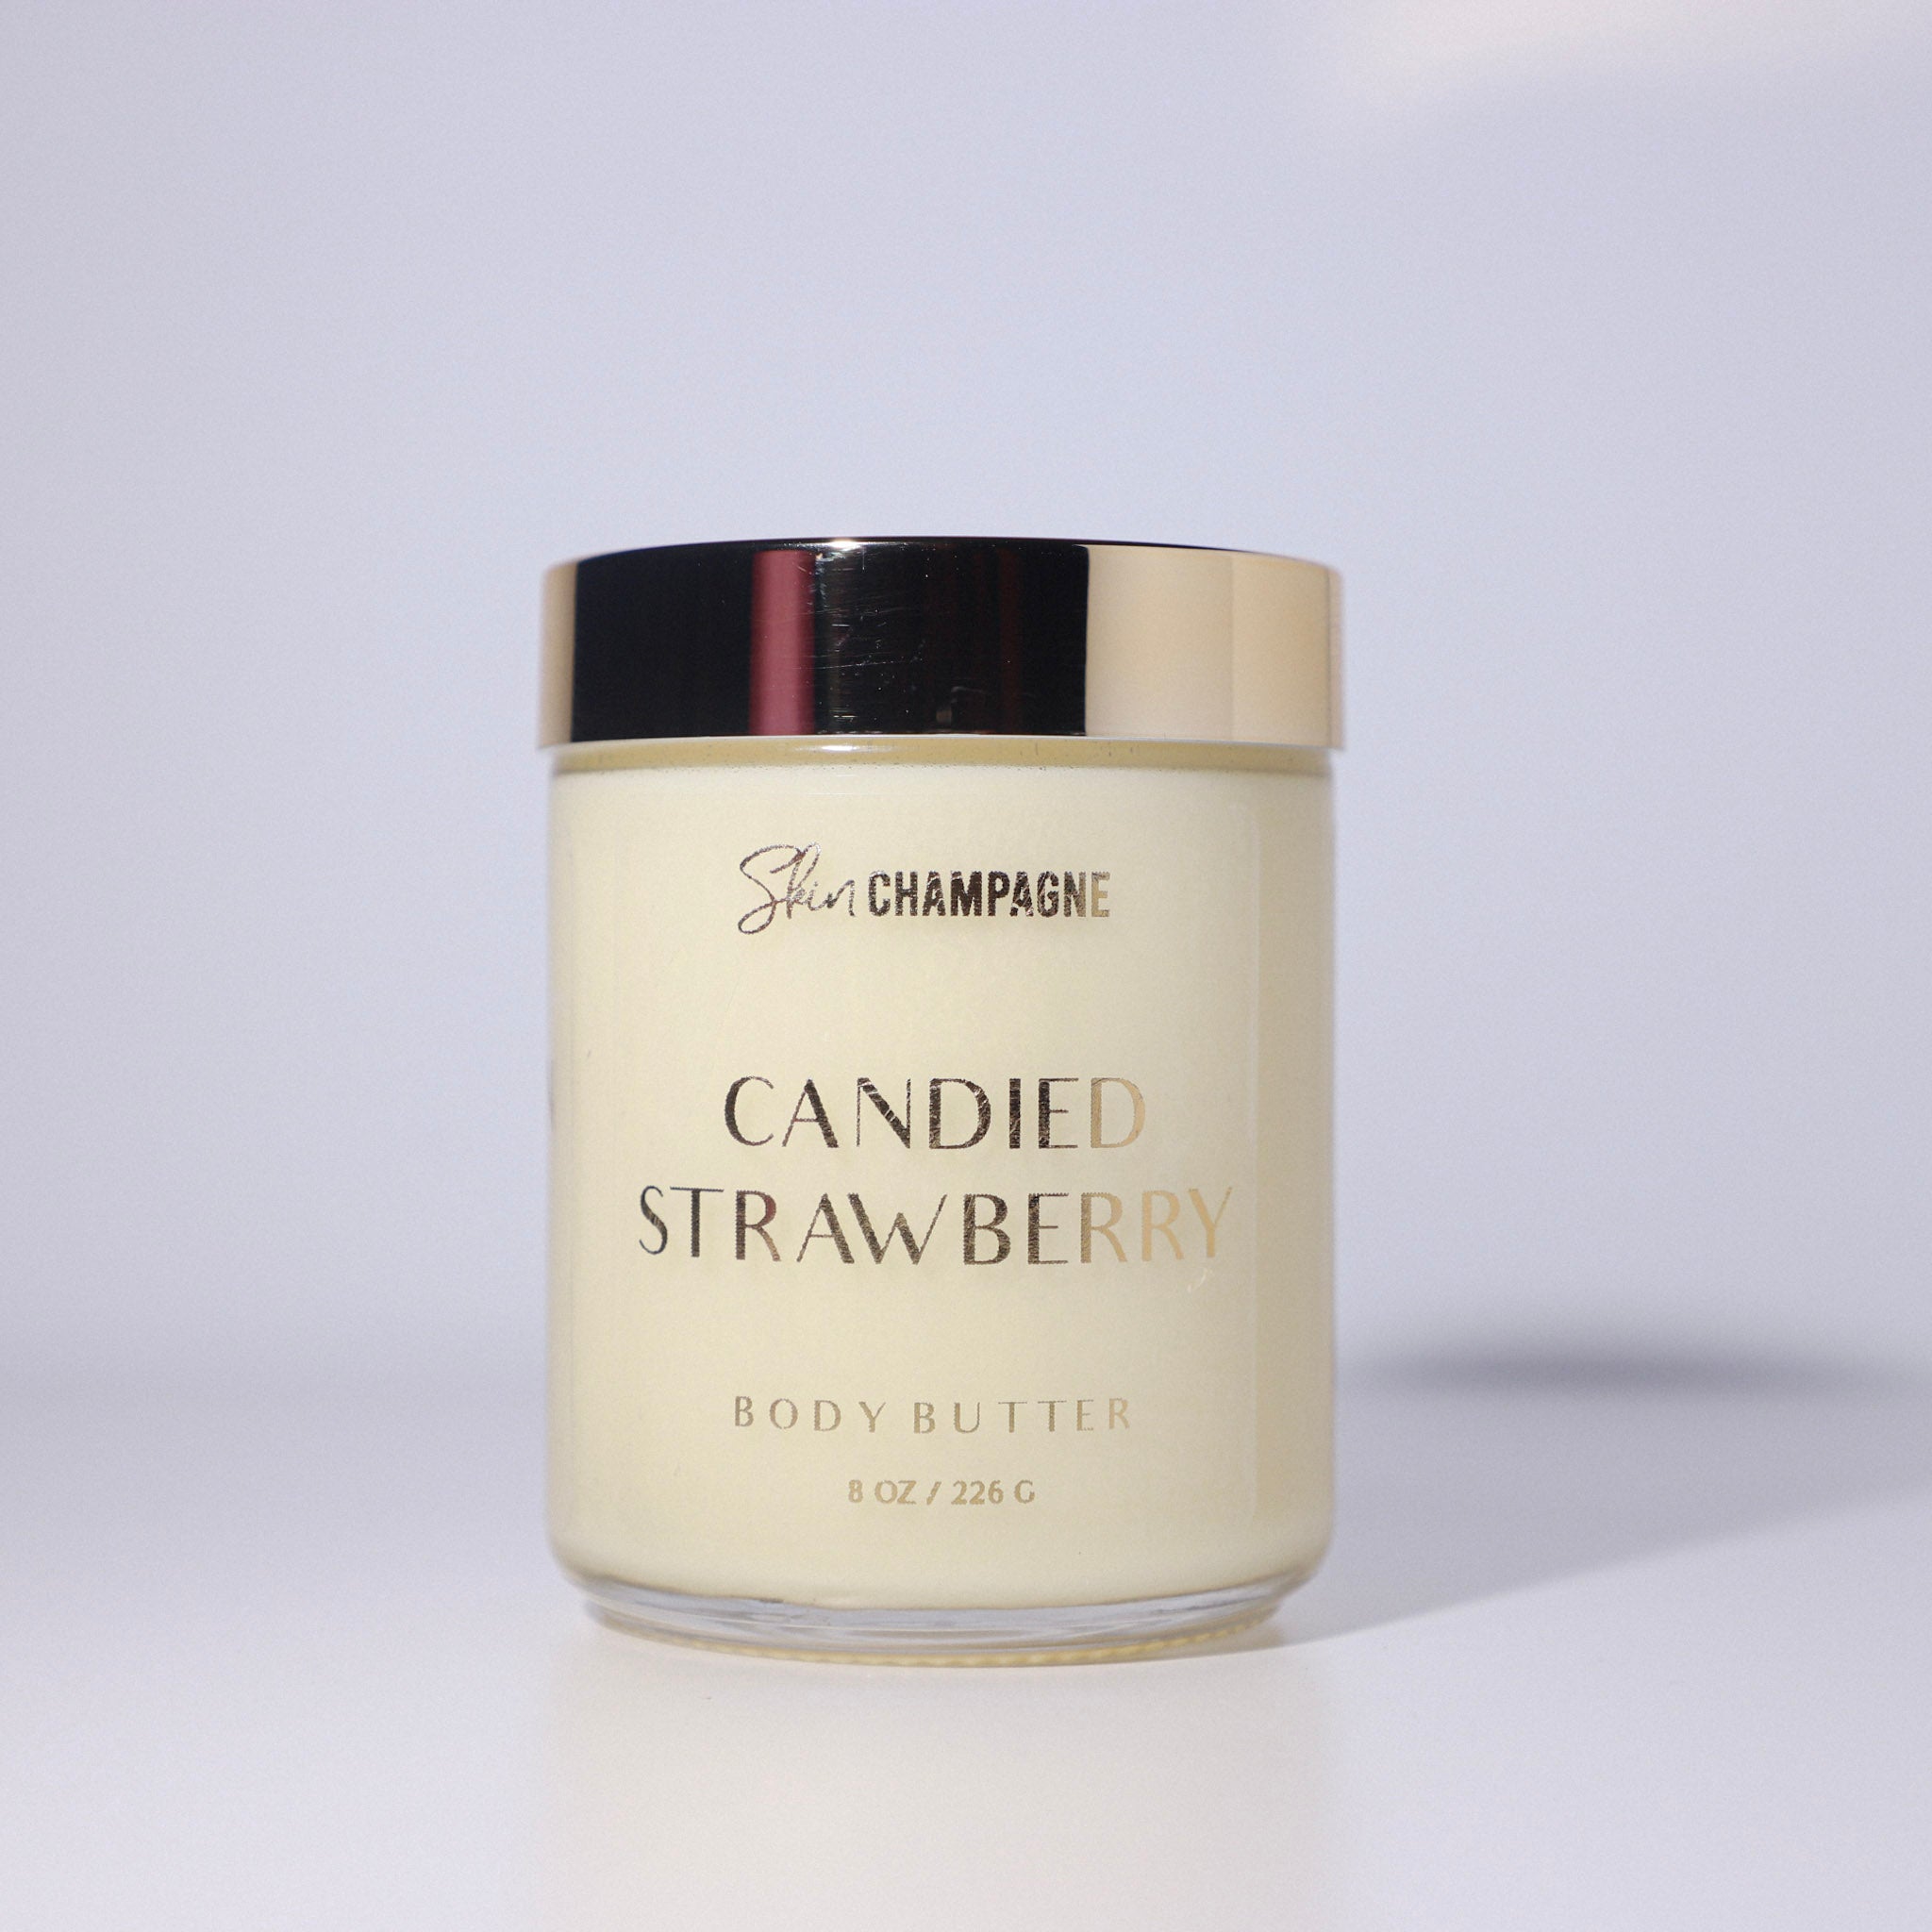 Candied Strawberry Body Butter